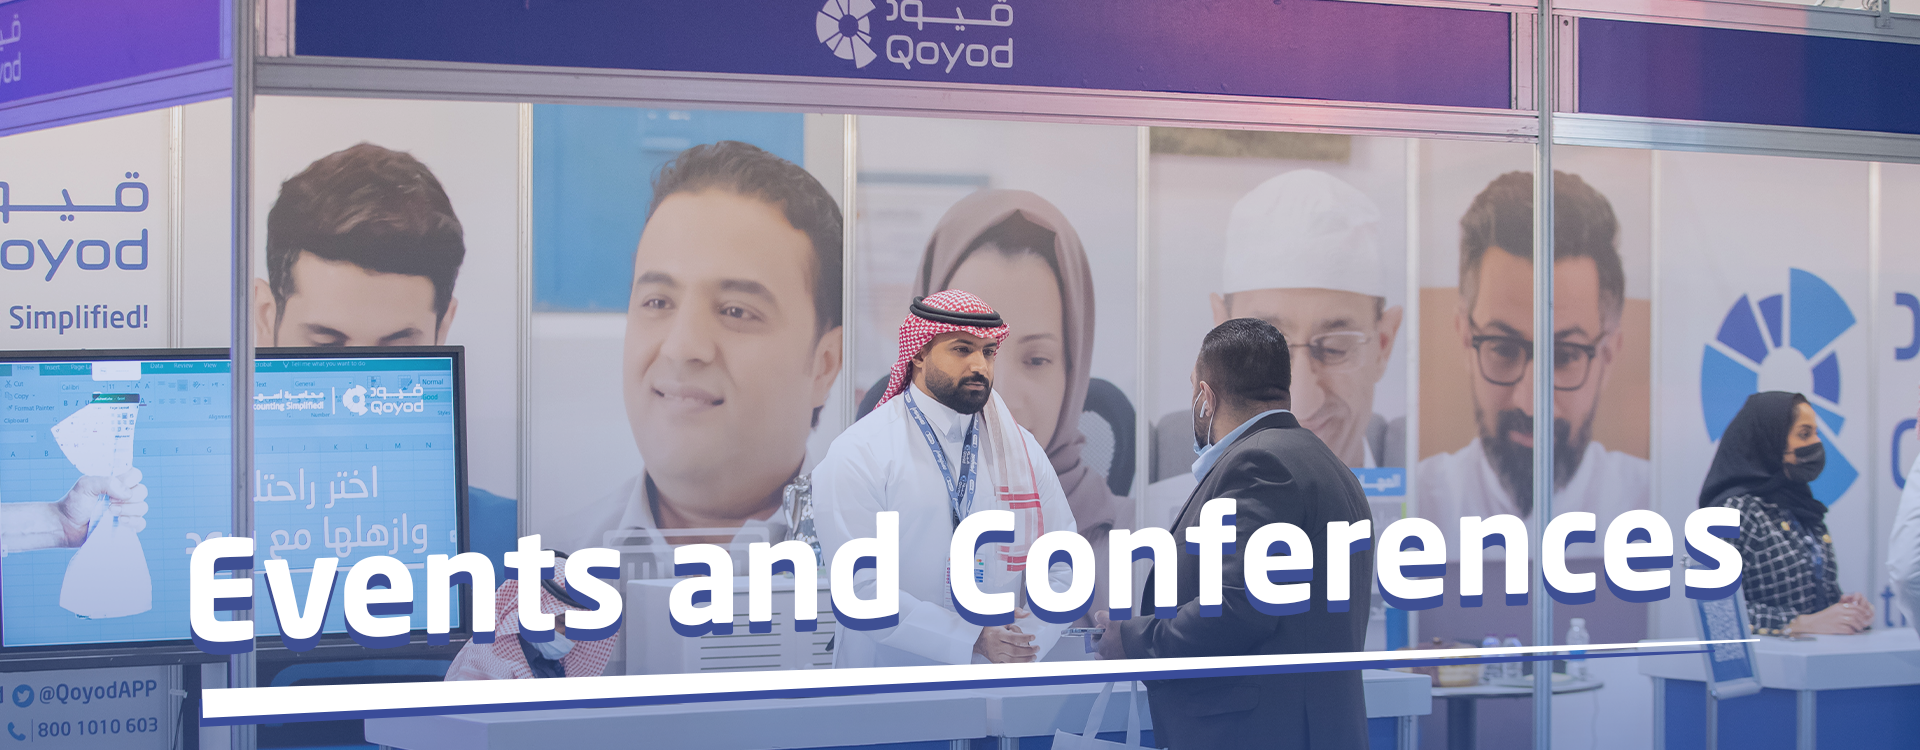 Exhibitions and Conferences - Qoyod